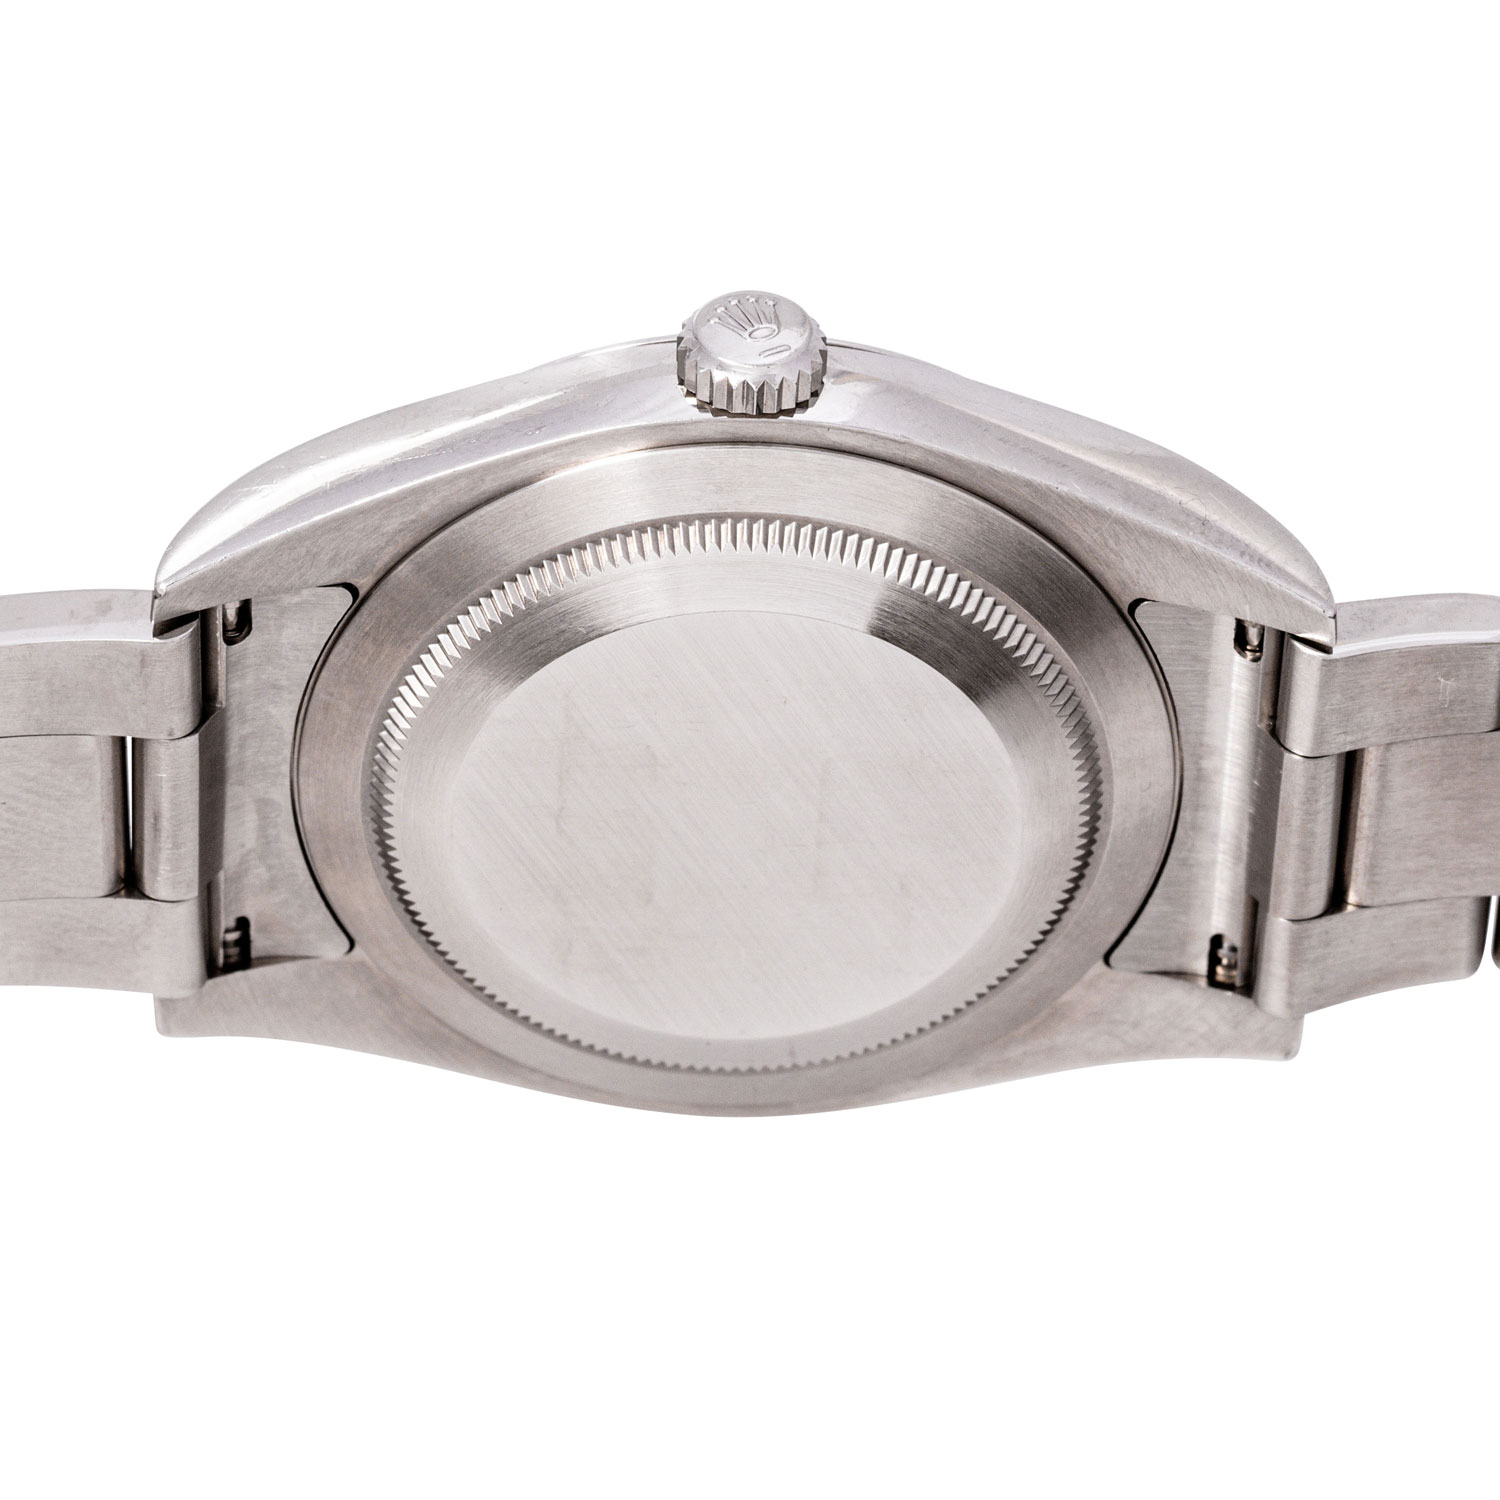 PFANDAUKTION - ROLEX Oyster Perpetual - Image 2 of 8